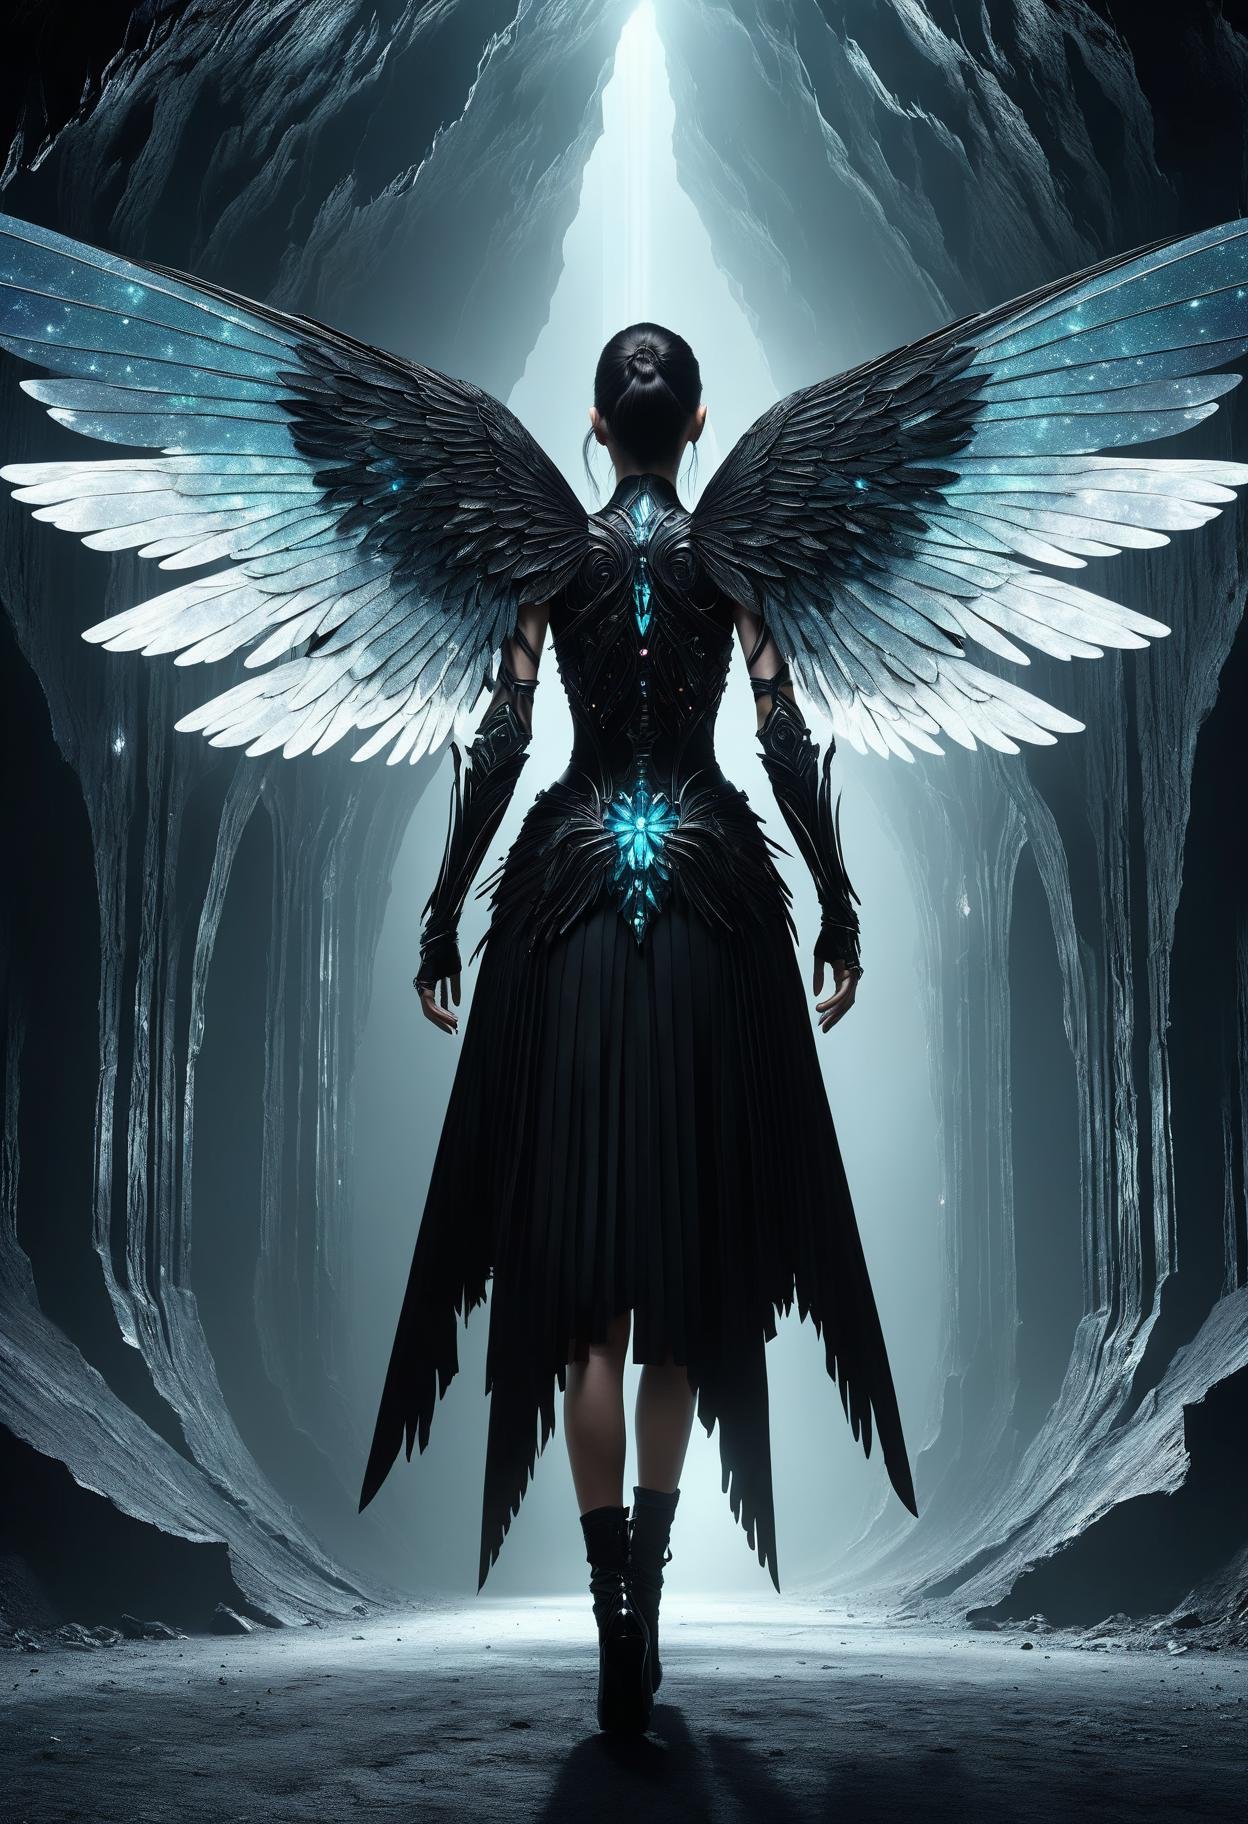 awesome quality, dynamic,DonMDr4g0nXL woman from behind,wings attached to back,skirt, (draconid:0.25) mars black nocturnal necrotic, crystal caves, elevator  <lora:myLora\DonMDr4g0nXL-v2rb:1>,